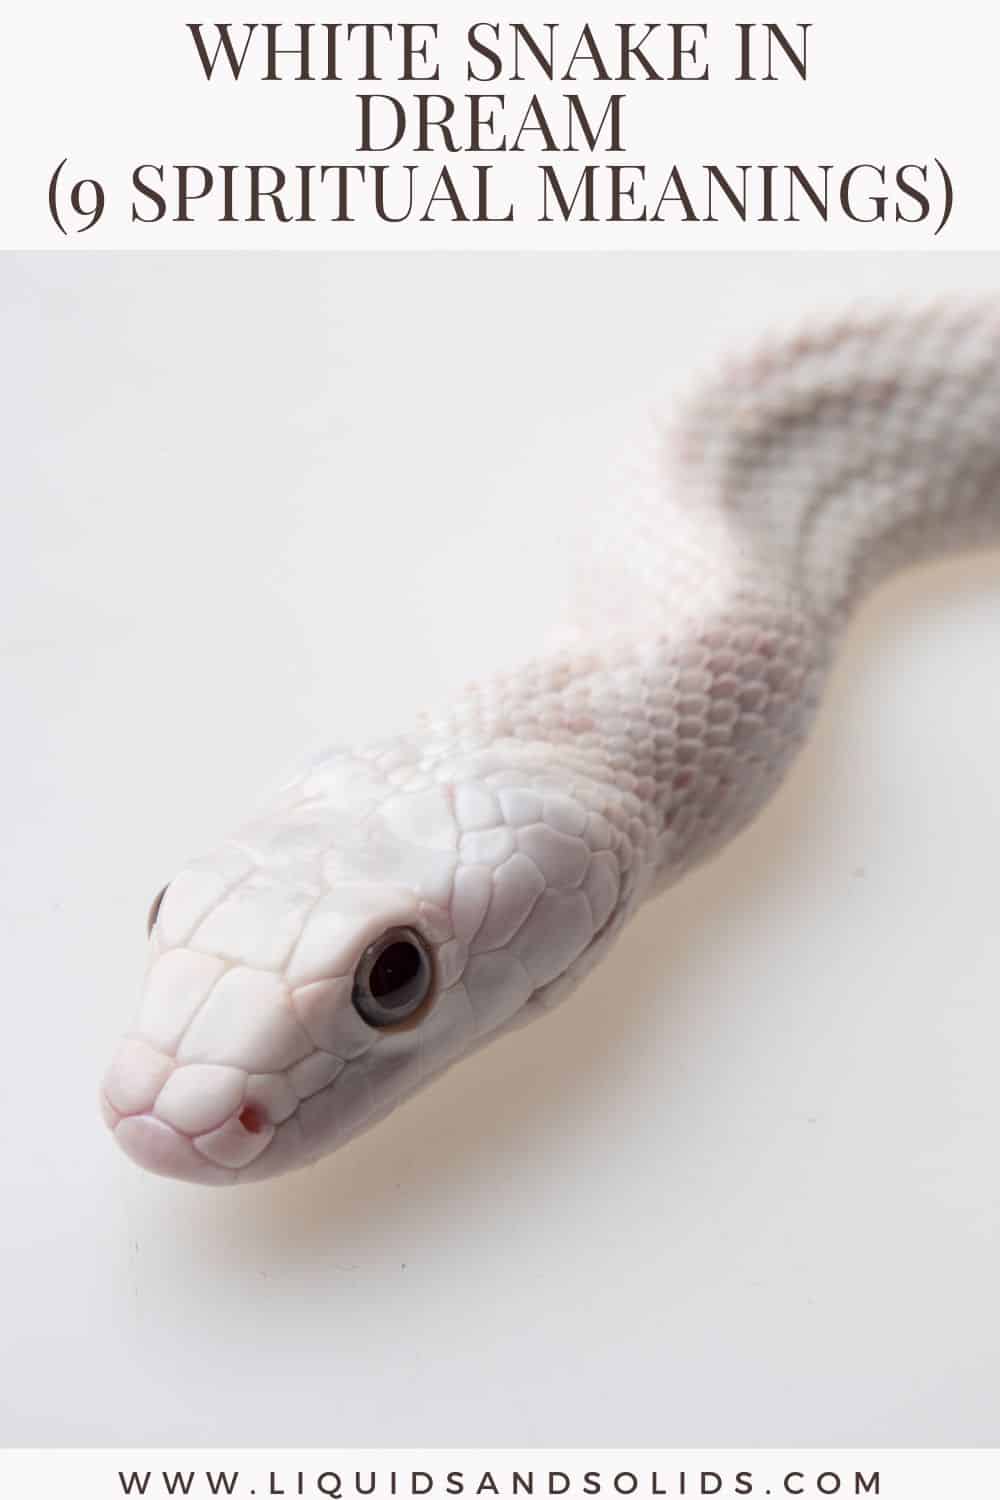 Dream about White Snake? (9 Spiritual Meanings)